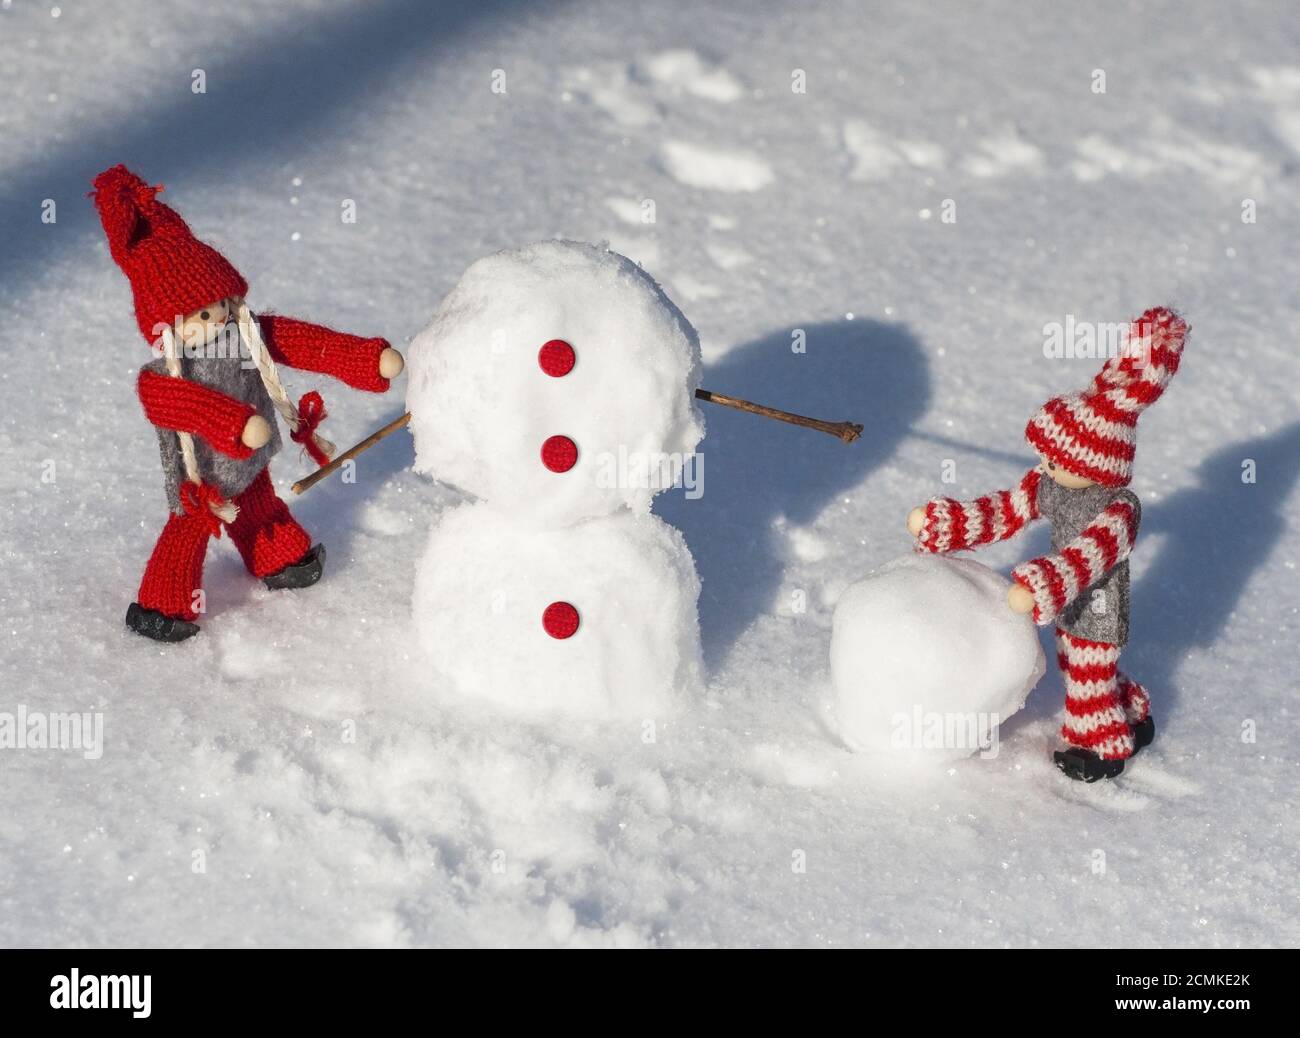 wooden dolls in red knitted clothes roll down snowballs to build a snowman Stock Photo